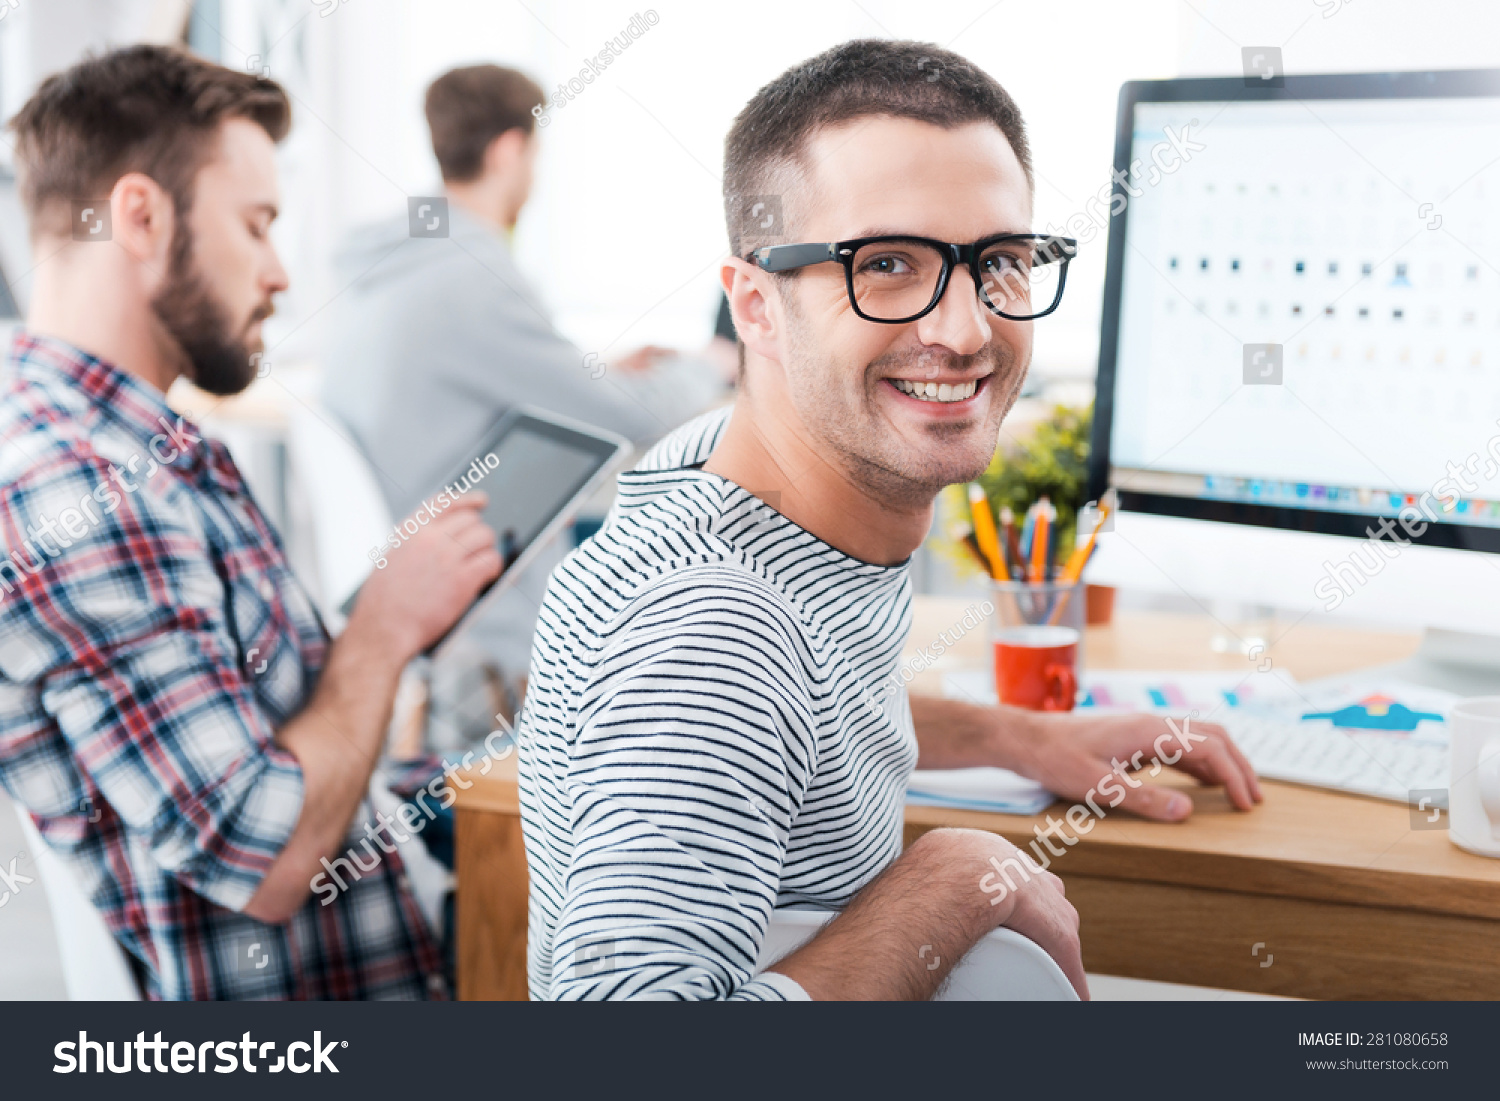 We Keep Casual Our Office Happy Stock Photo 281080658 - Shutterstock